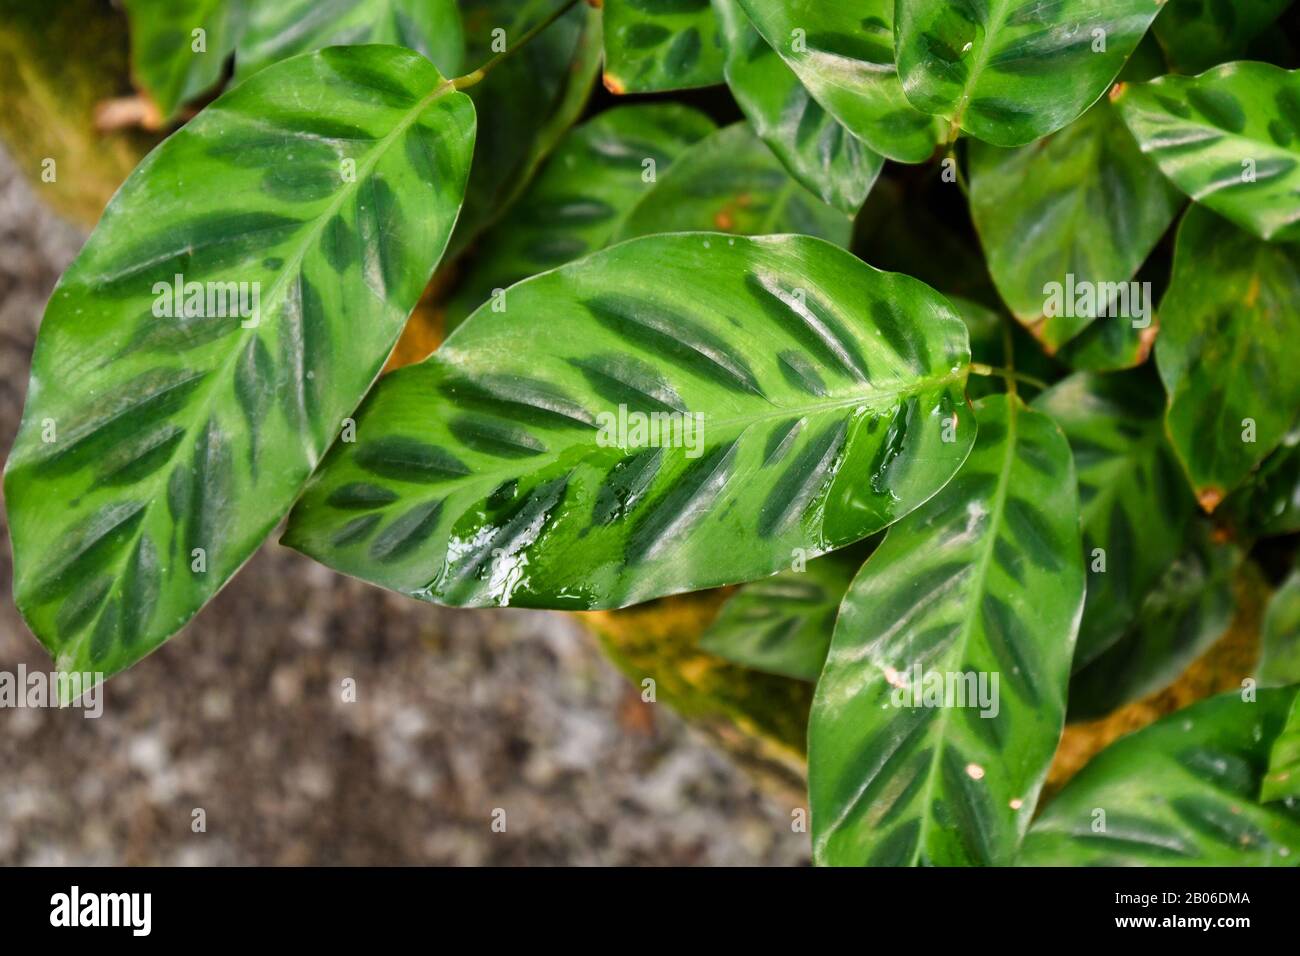 Tropical 'Calathea Goeppertia Wiotii' plant with bright leaves with dark green stripe like markings Stock Photo